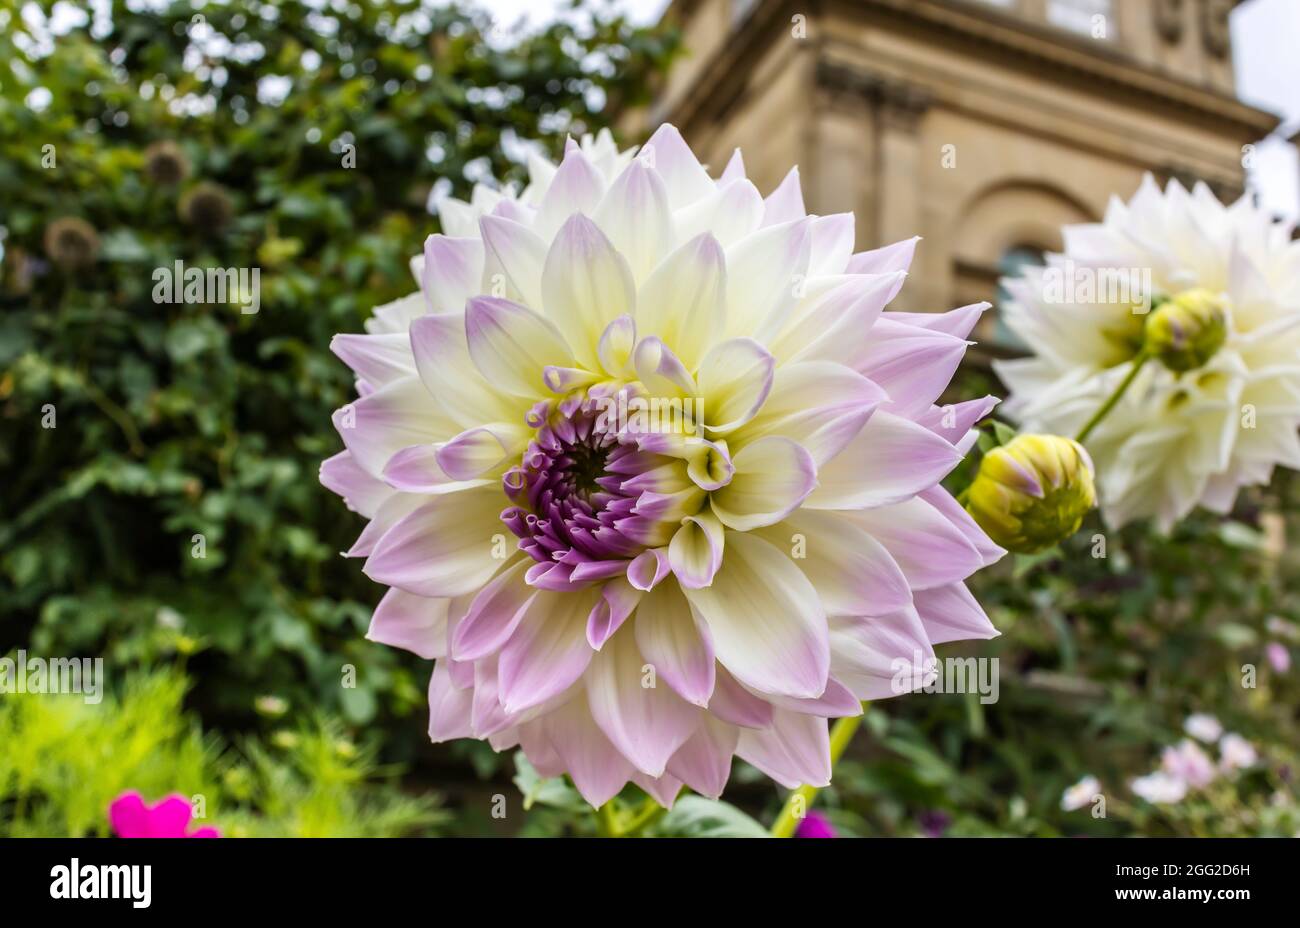 Close-up of large blush cream and lavender dahlia head in a garden. Stock Photo